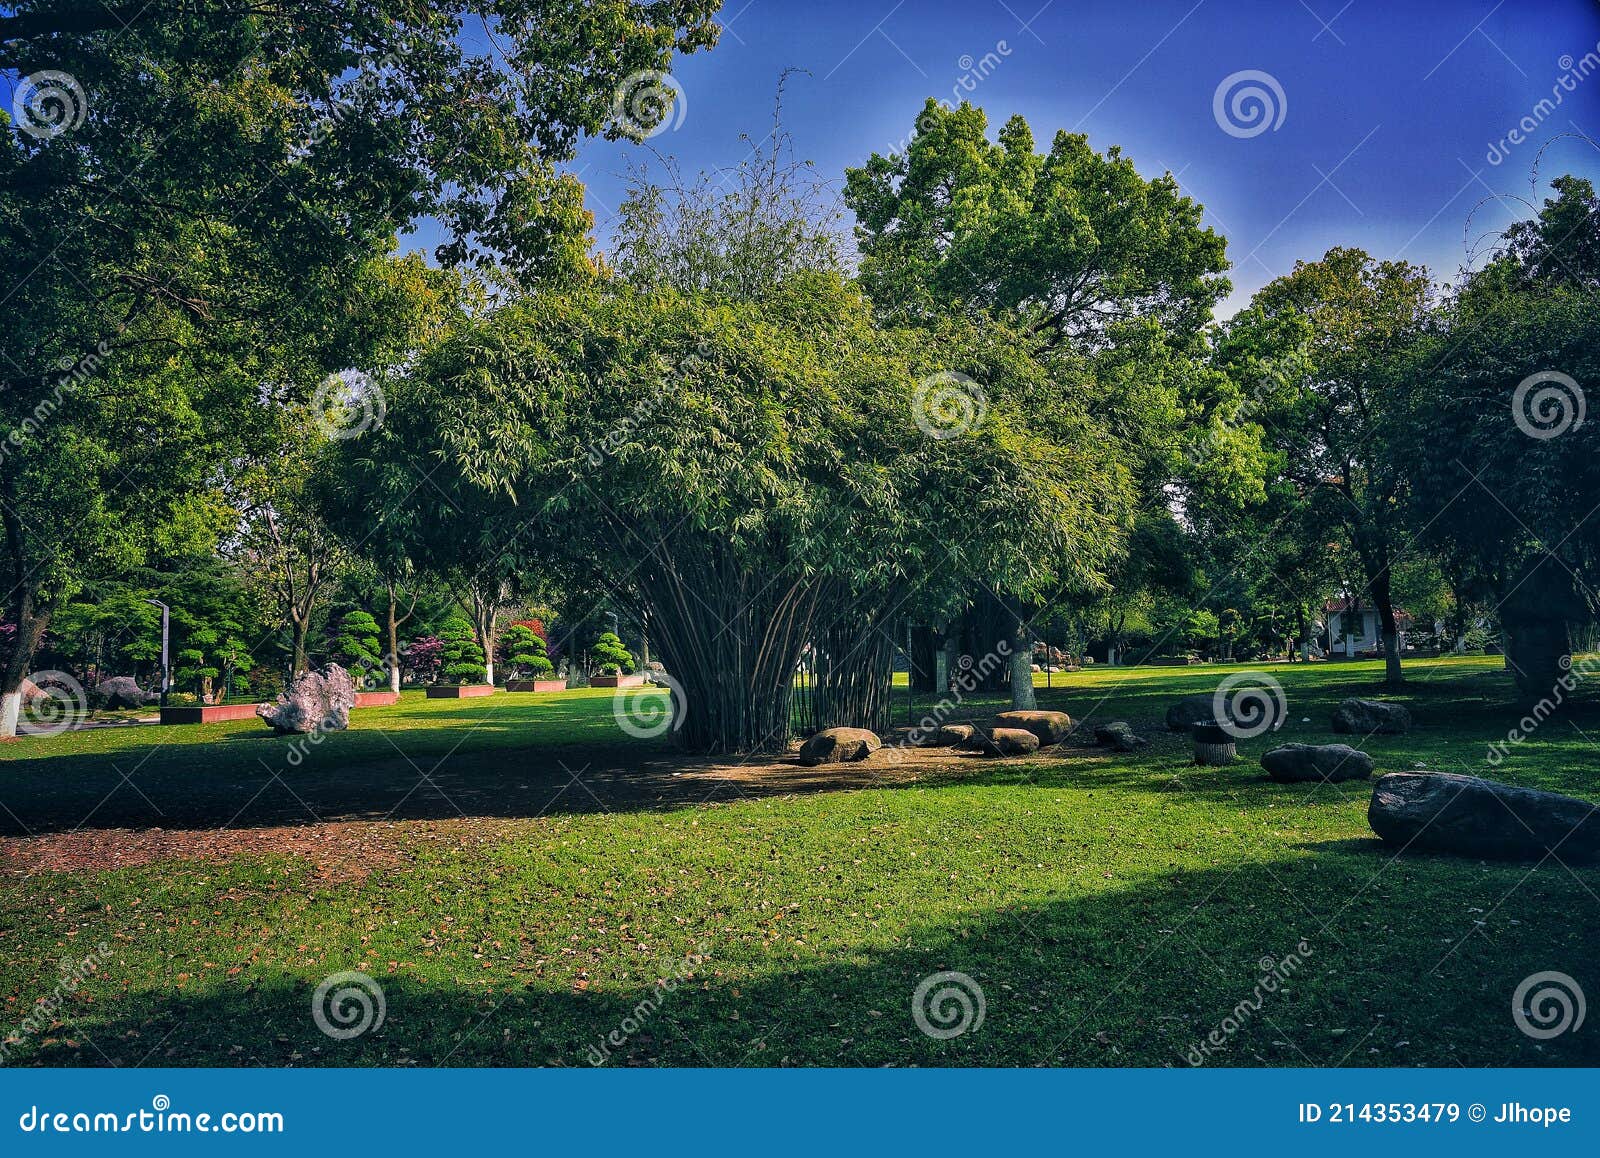 Green Trees and Lawns with Blue Sky Stock Image - Image of days, lawns ...